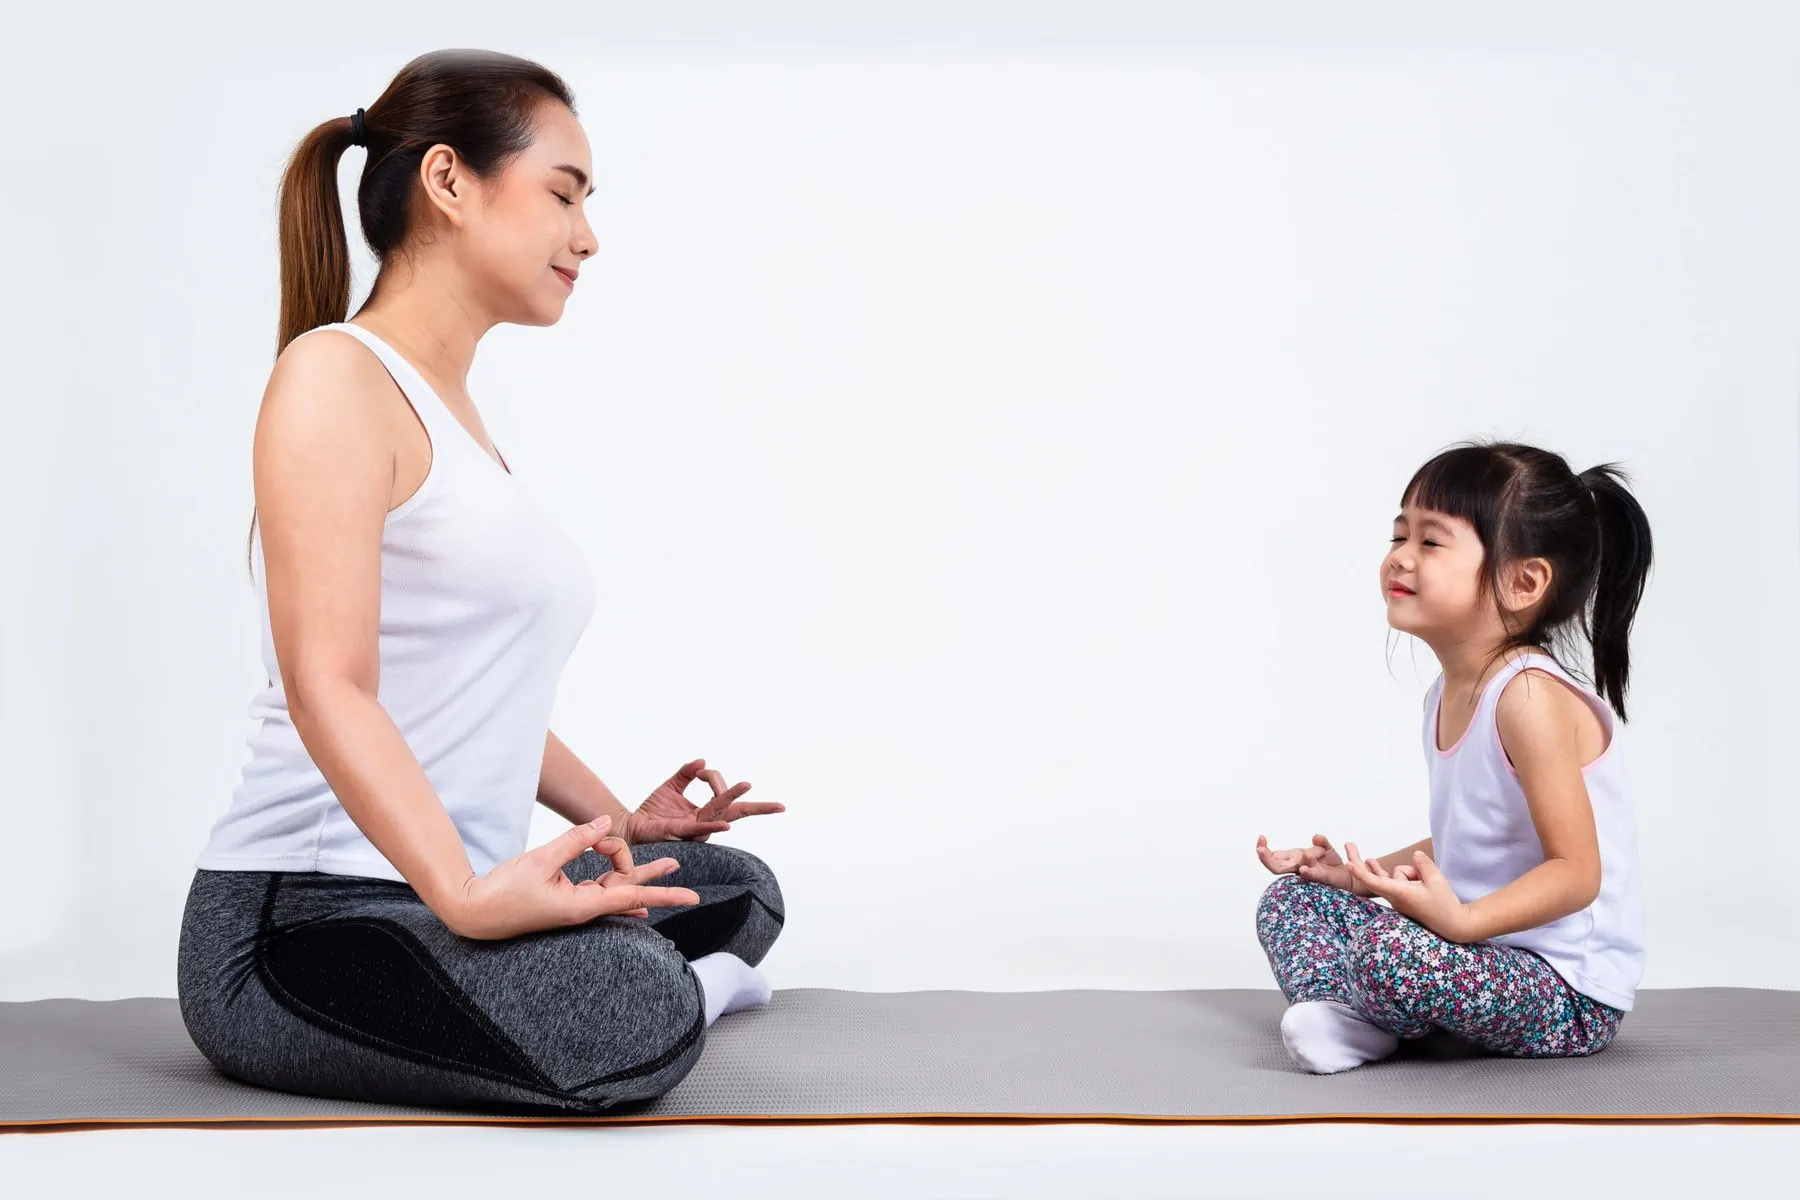 Daughter and mother sitting on yoga mat meditating.